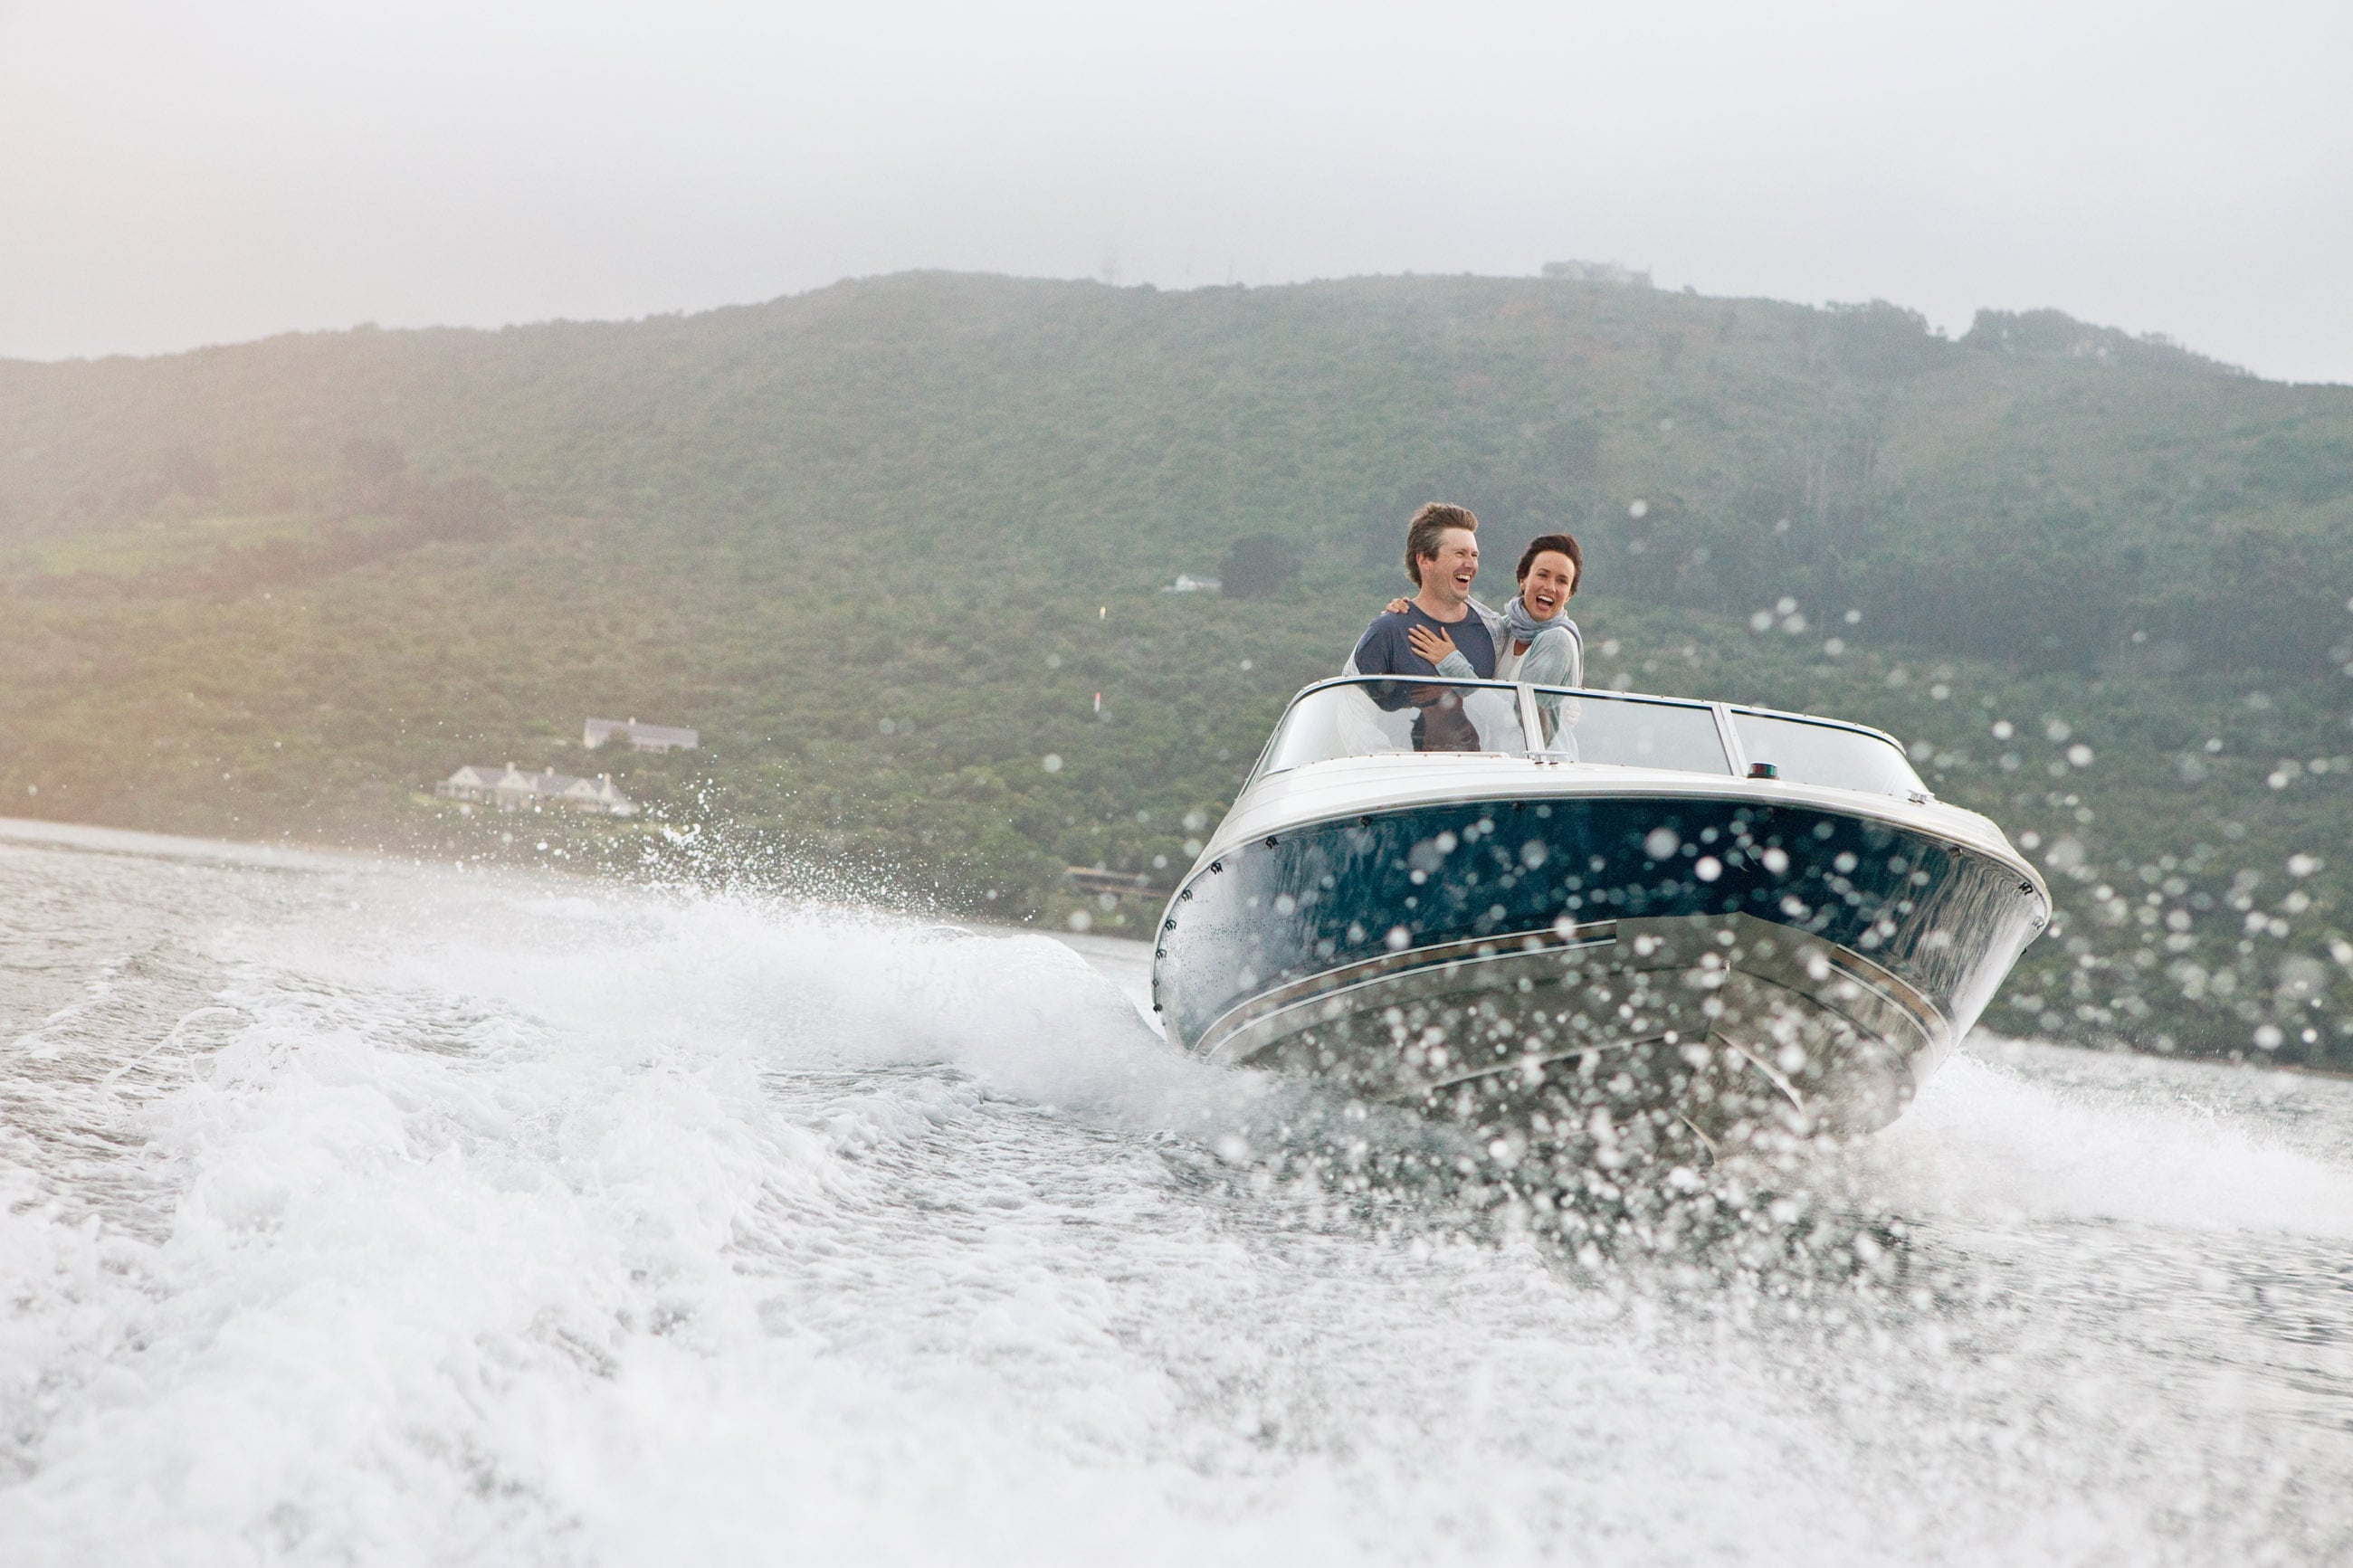 Speedboat to the cloud and business transformation